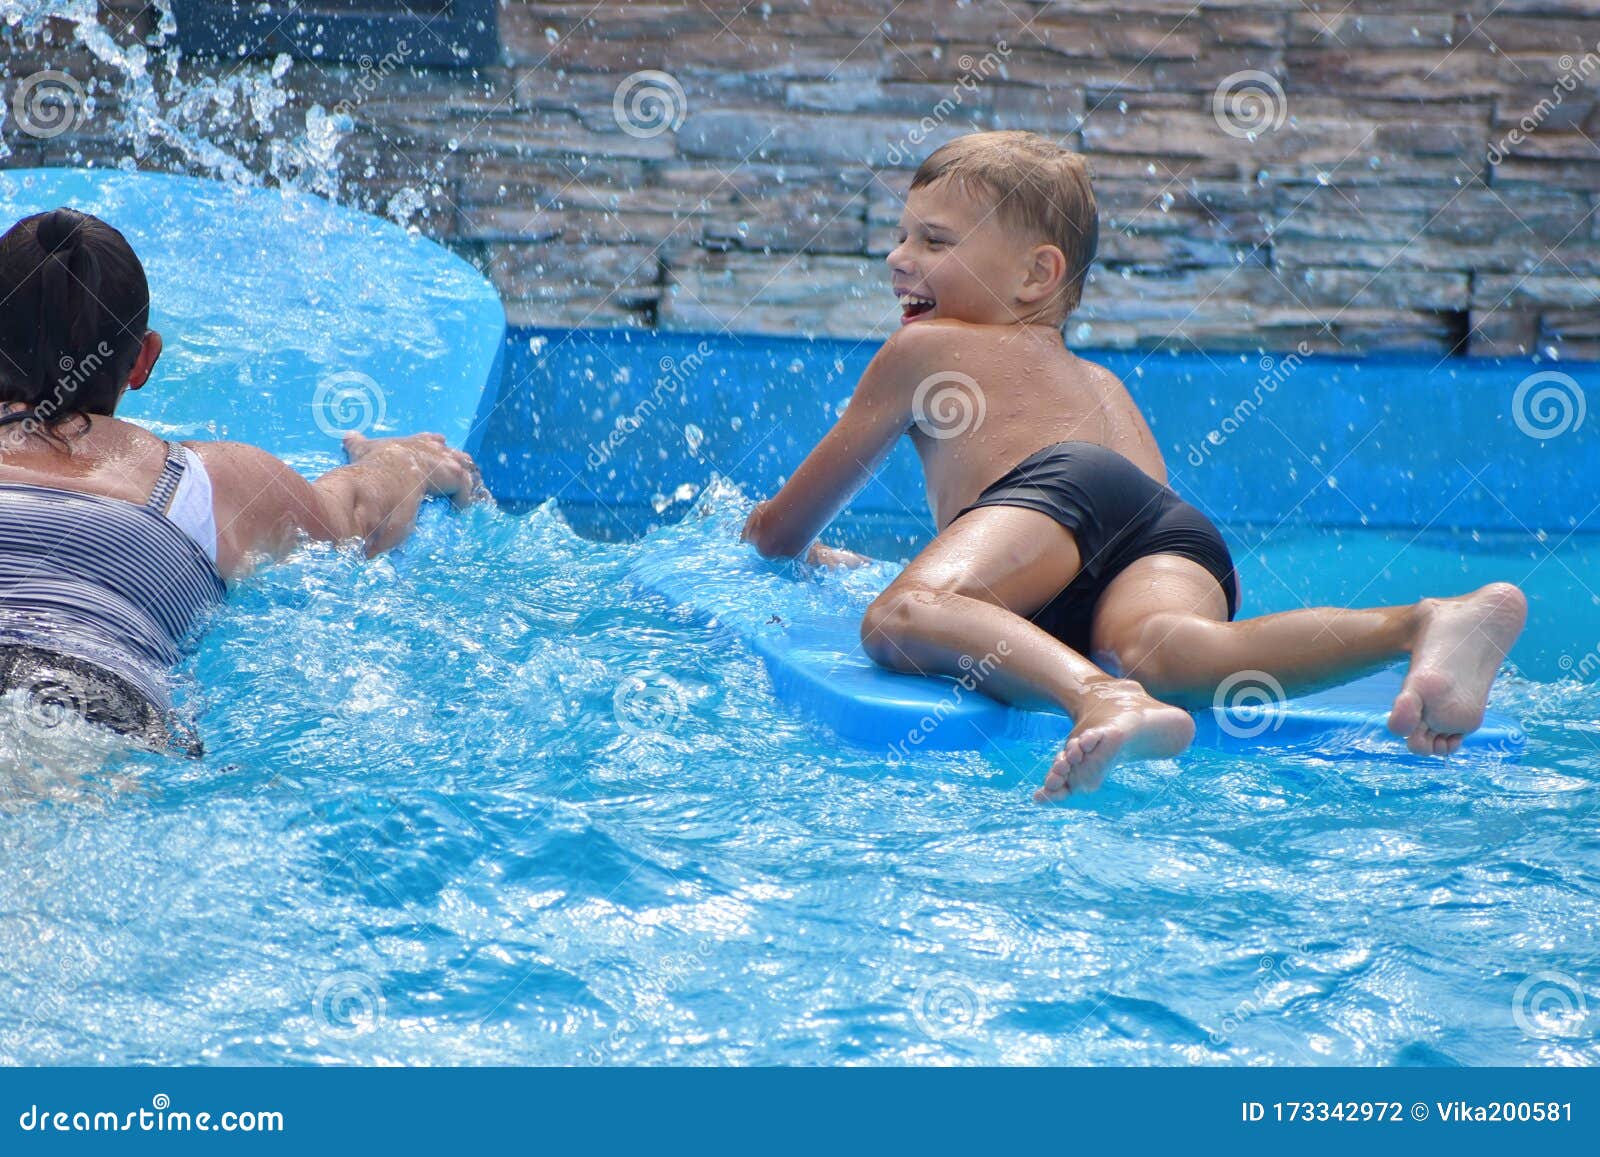 Children in the Outdoor Pool. Funny Kids at the Water Park. Happy ...